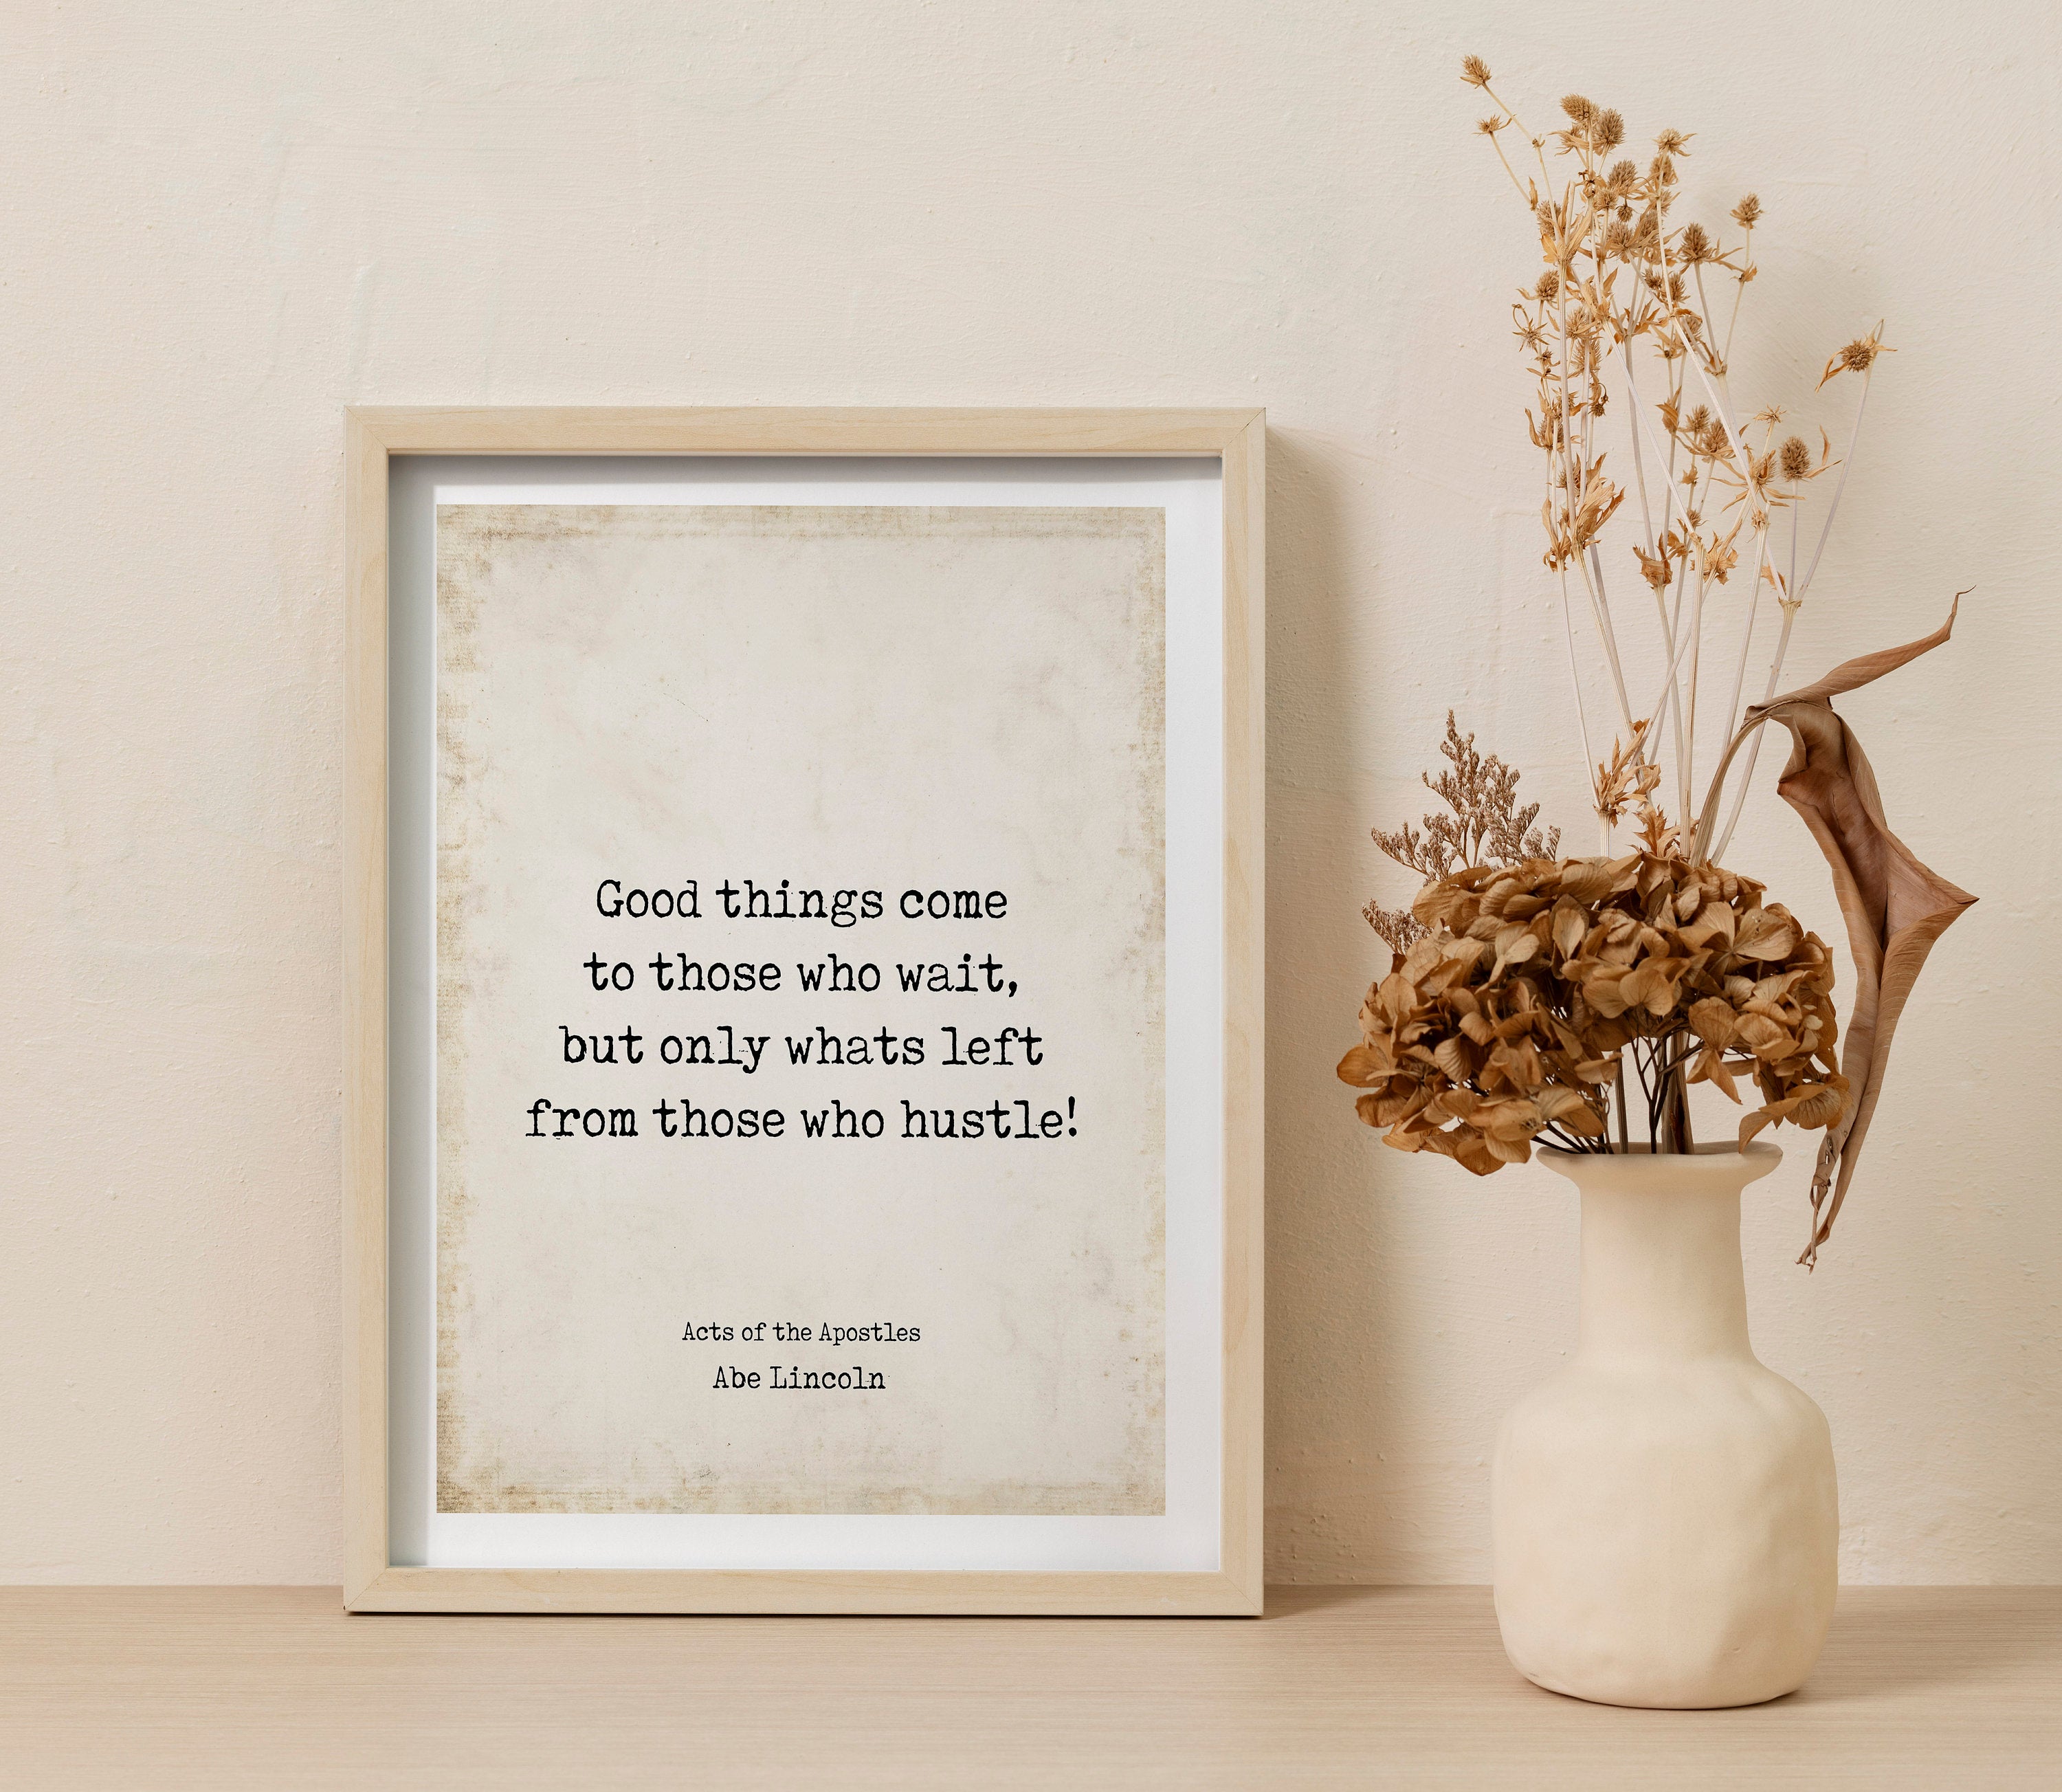 Abraham Lincoln Quote Print, Good Things Come To Those Who Wait, Inspirational Black & White or Vintage Art Decor Unframed or Framed Art